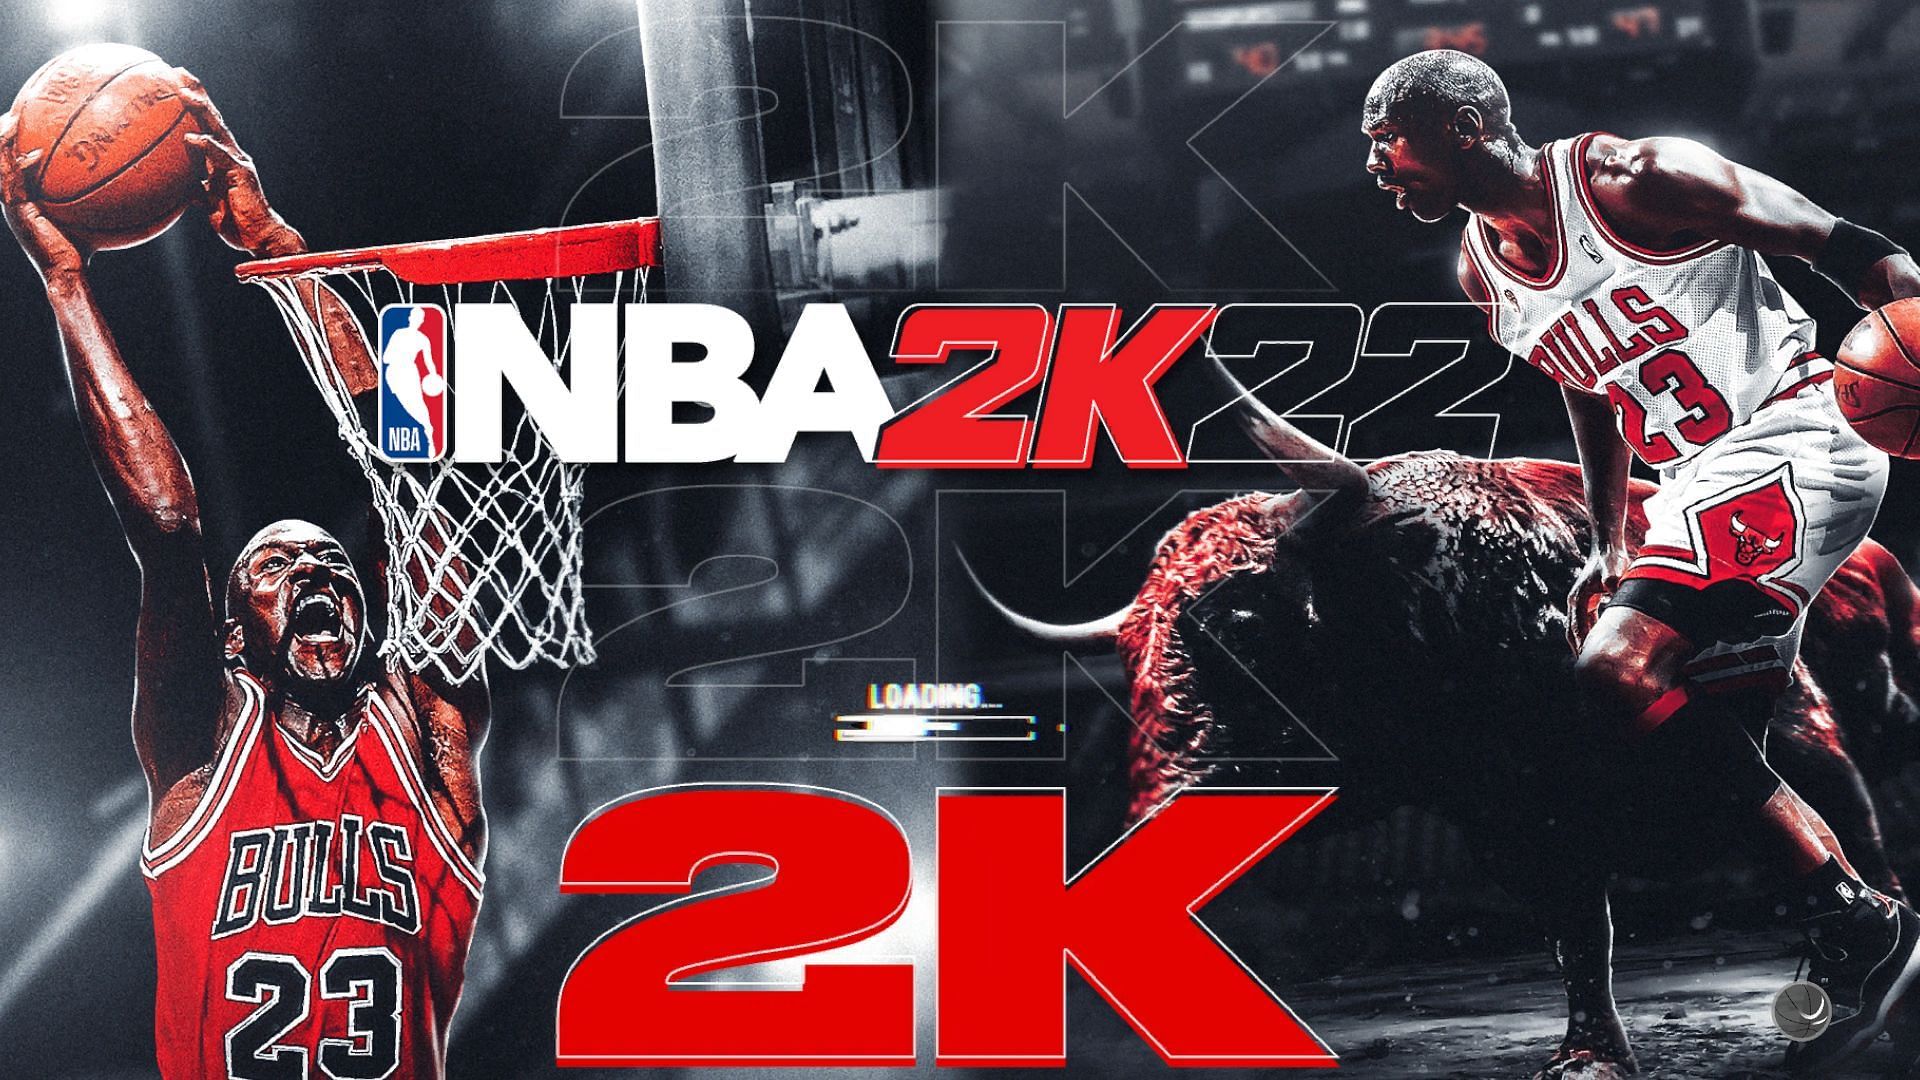 Ball is in your court, play as Jordan or create your own player from scratch and bucket 3-pointers. (Image via 2k)